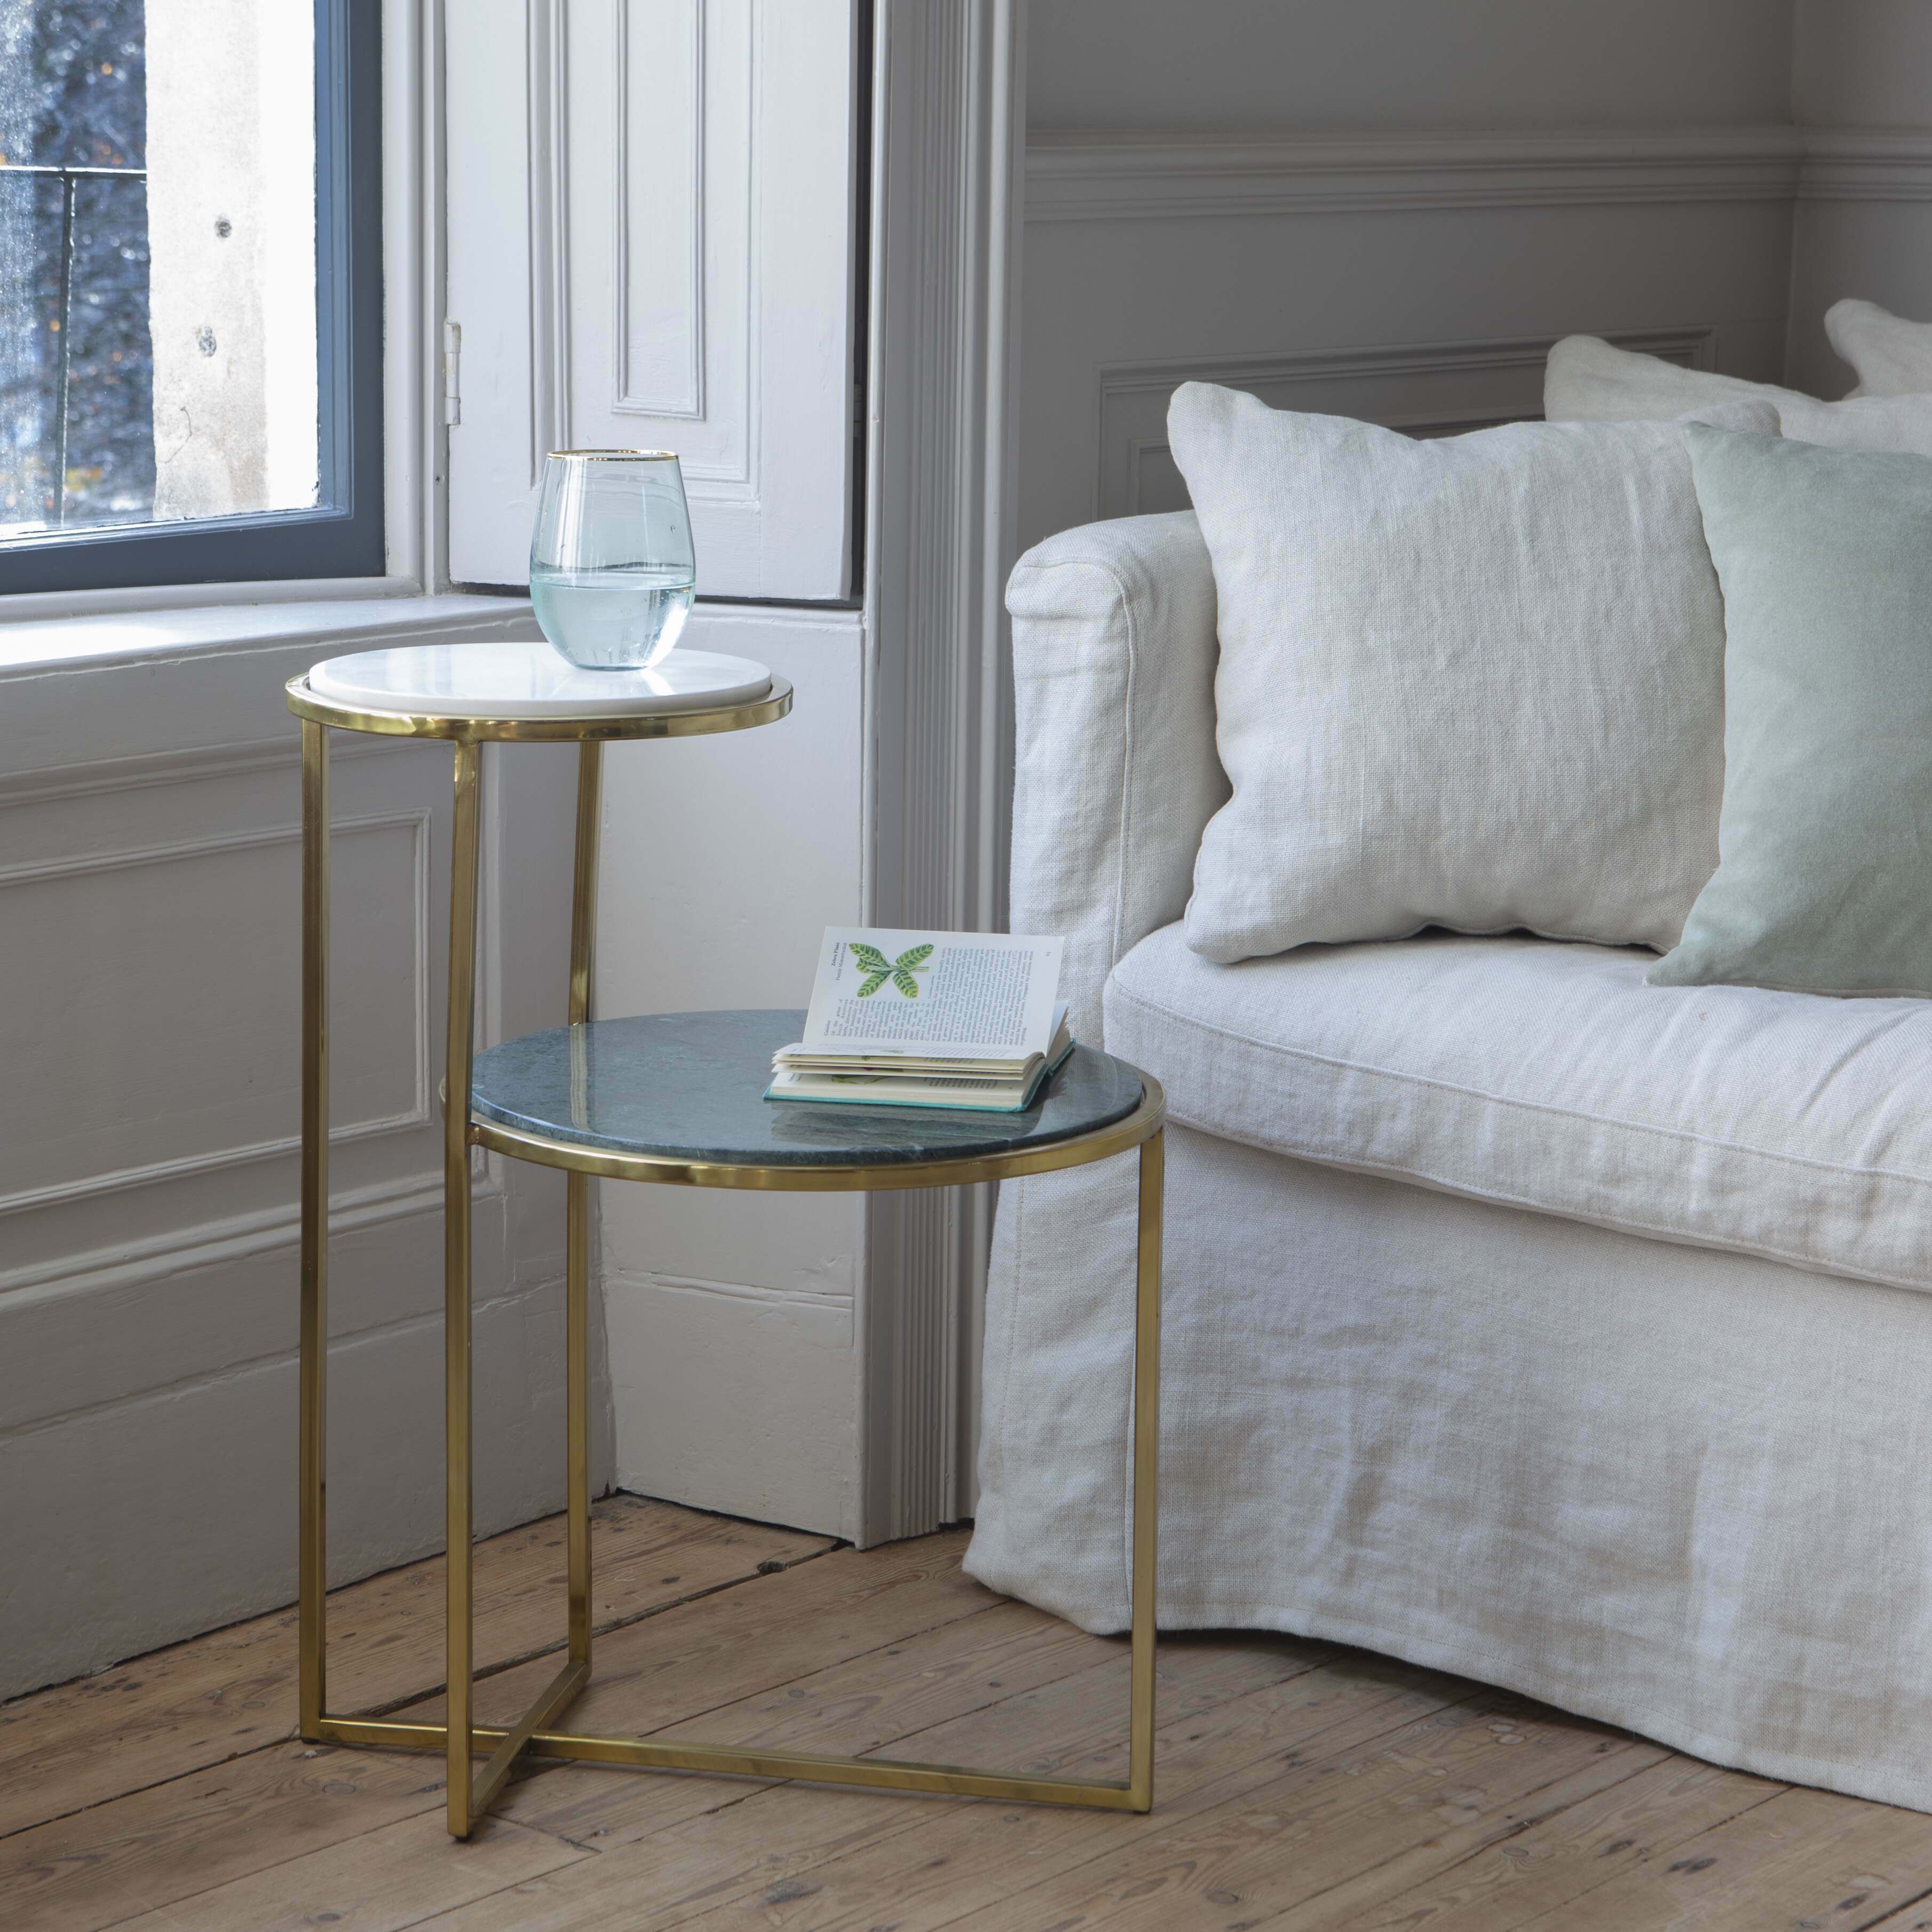 Photo of Graham and green lex tiered marble side table